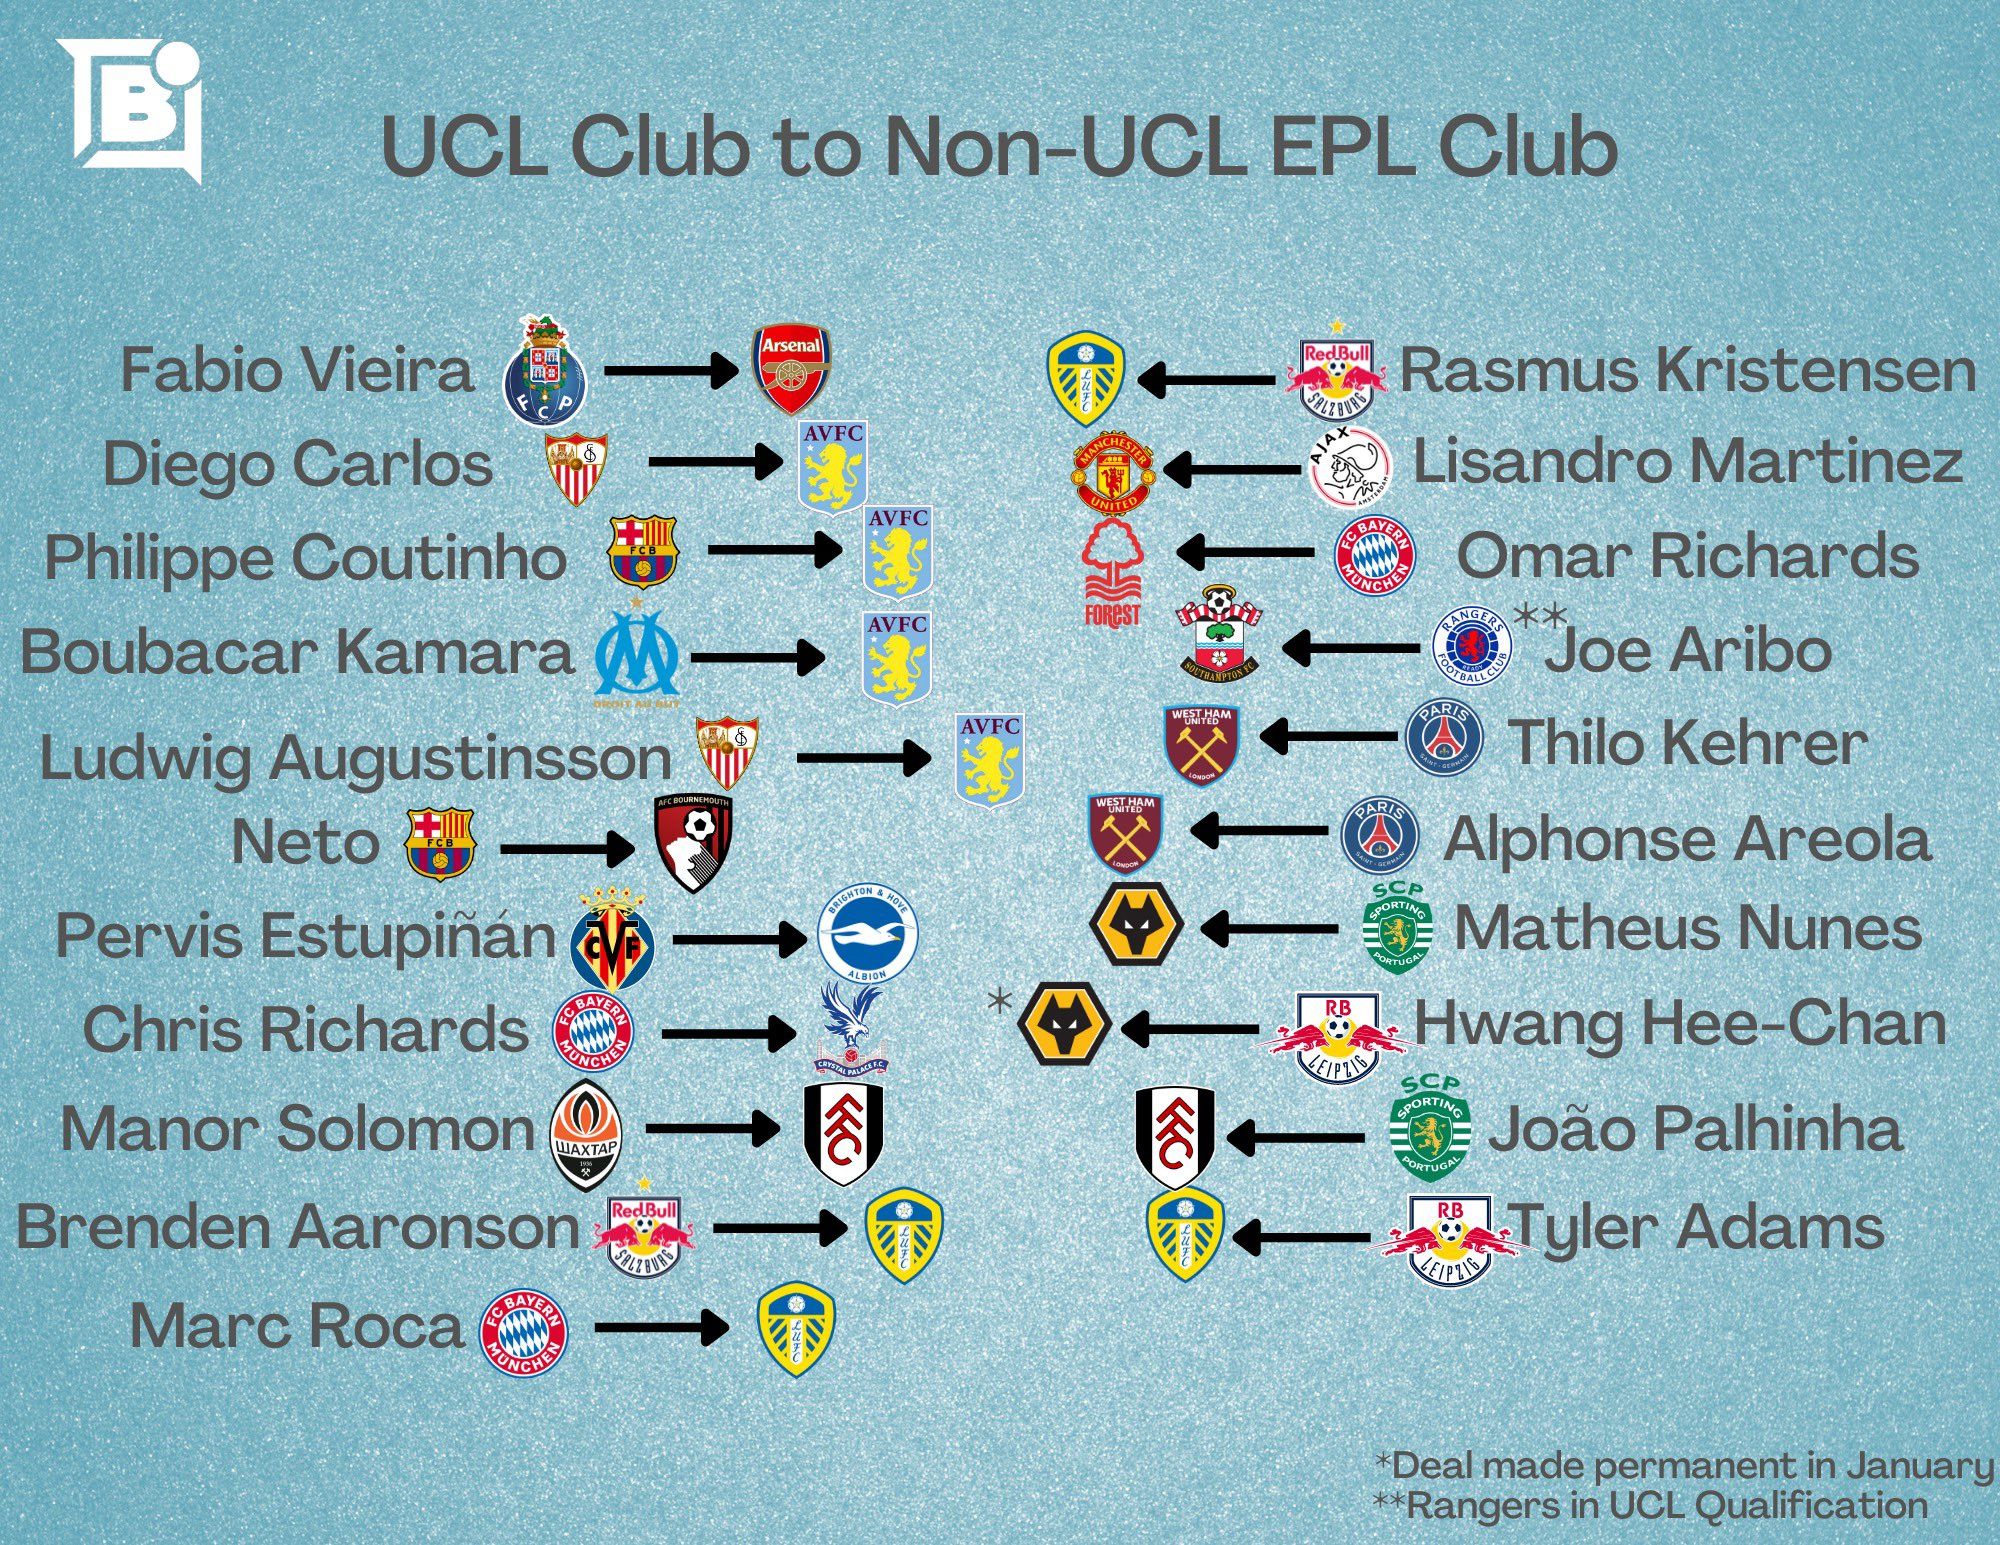 Graphic details players to have moved from a UCL club to a PL, non-UCL club